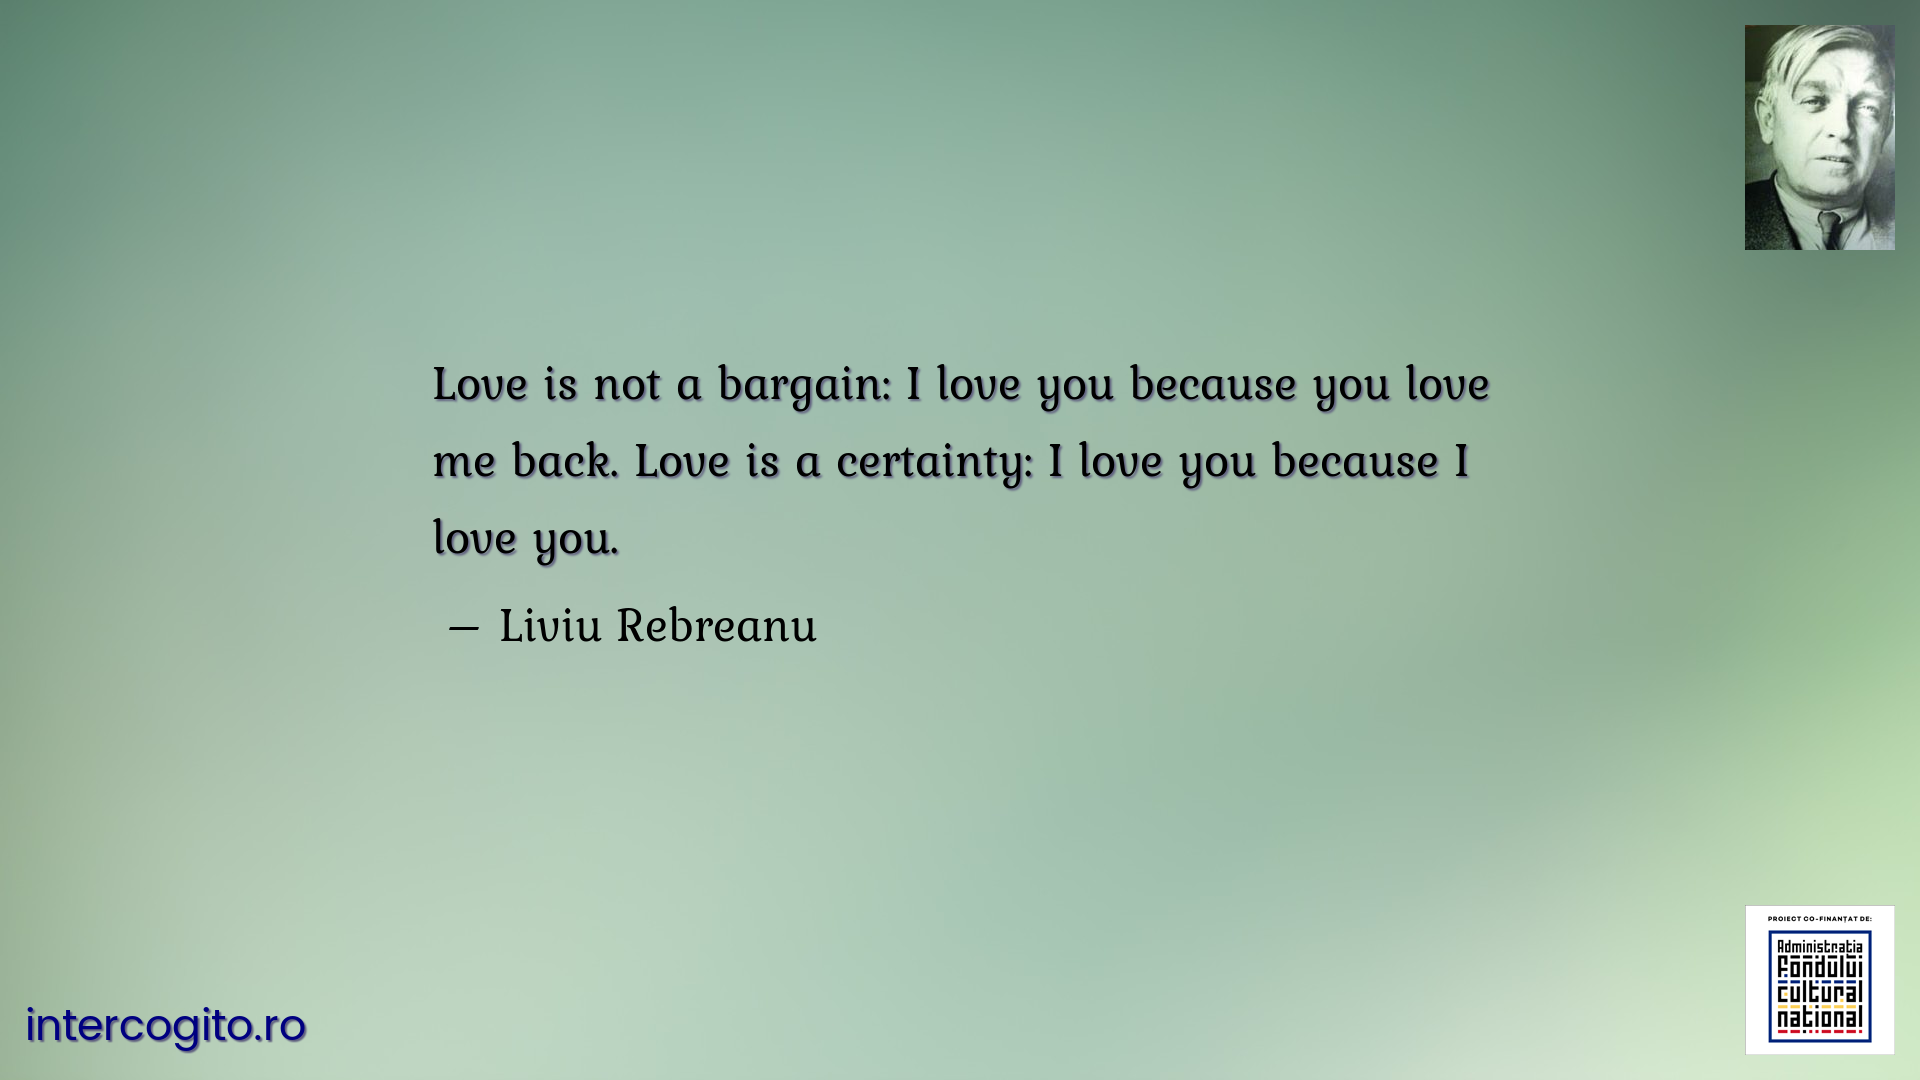 Love is not a bargain: I love you because you love me back. Love is a certainty: I love you because I love you.